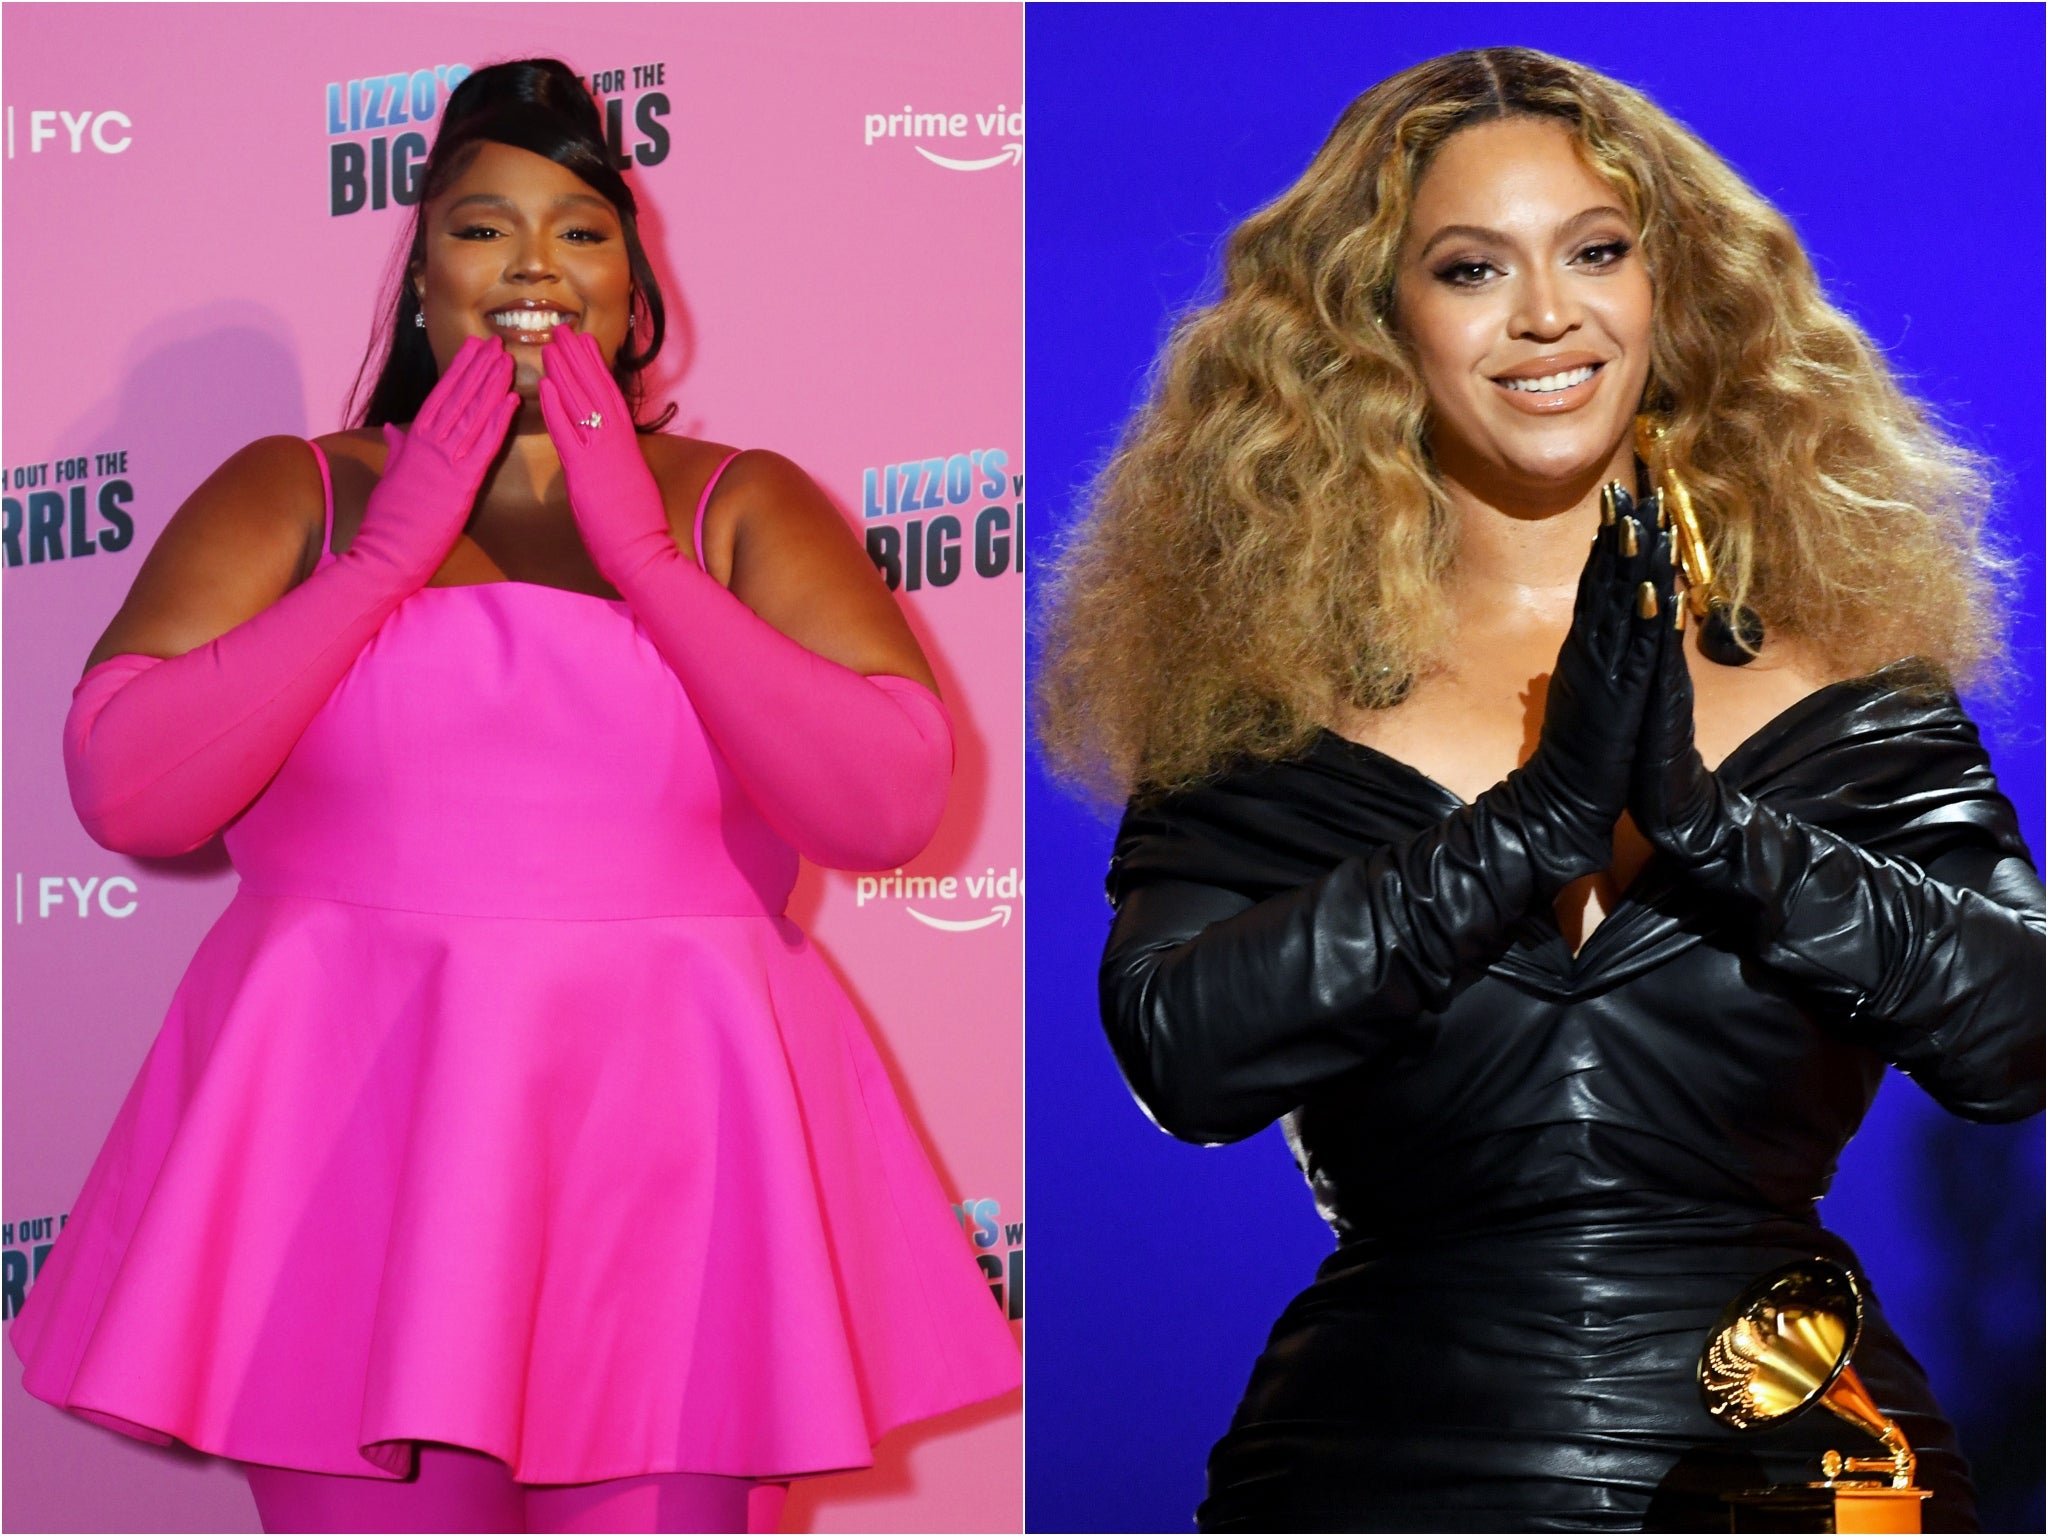 Lizzo (left) and Beyonce